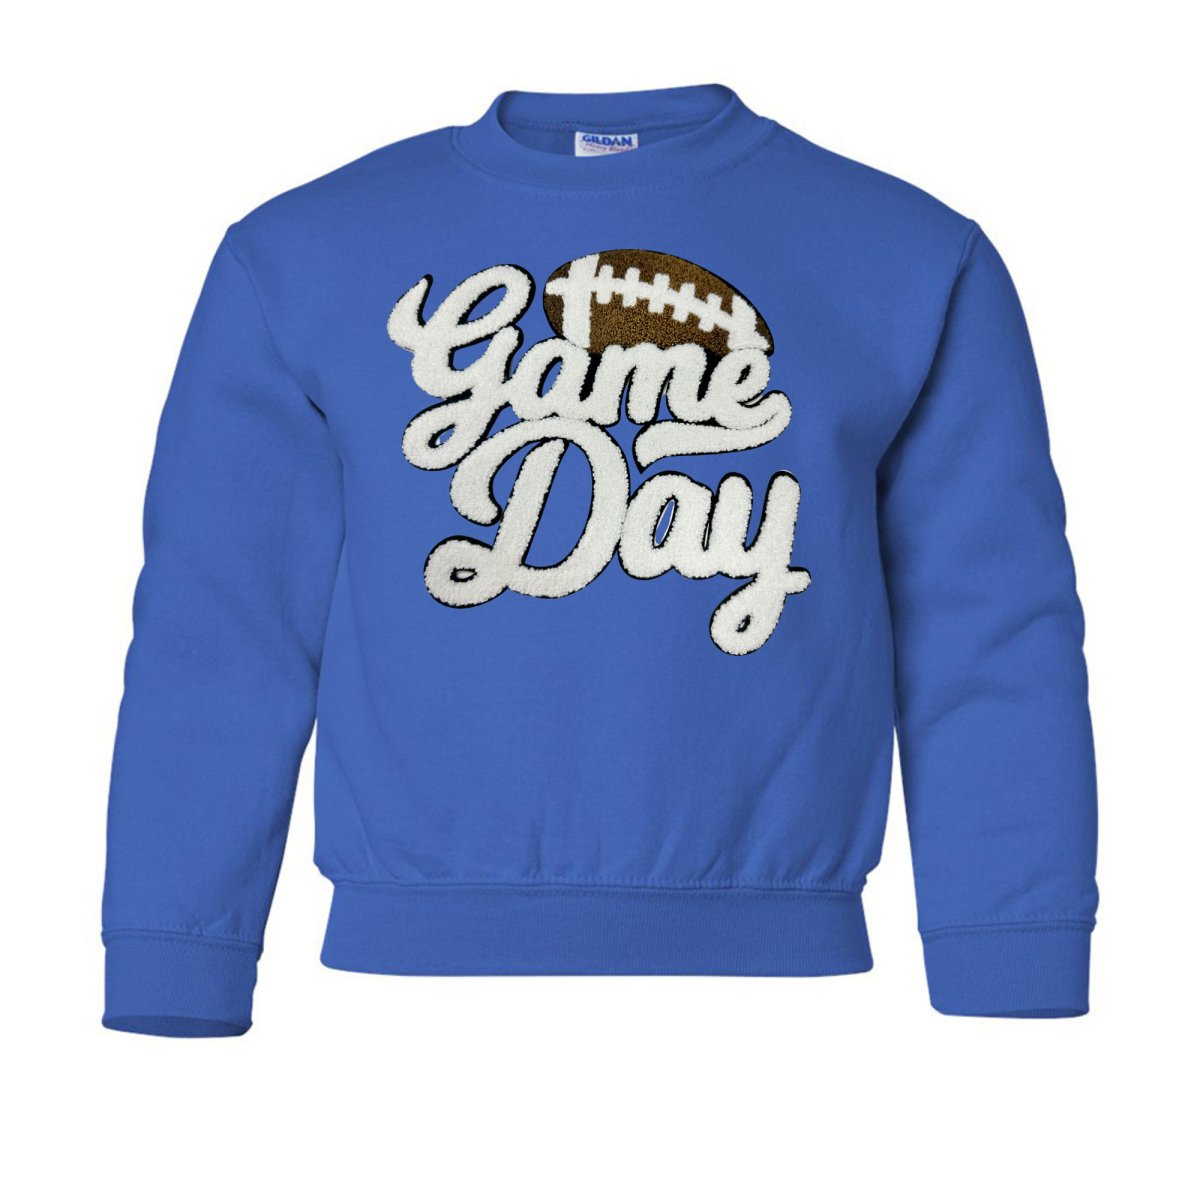 Kids Football 'Game Day' Letter Patch Crewneck Sweatshirt - United Monograms